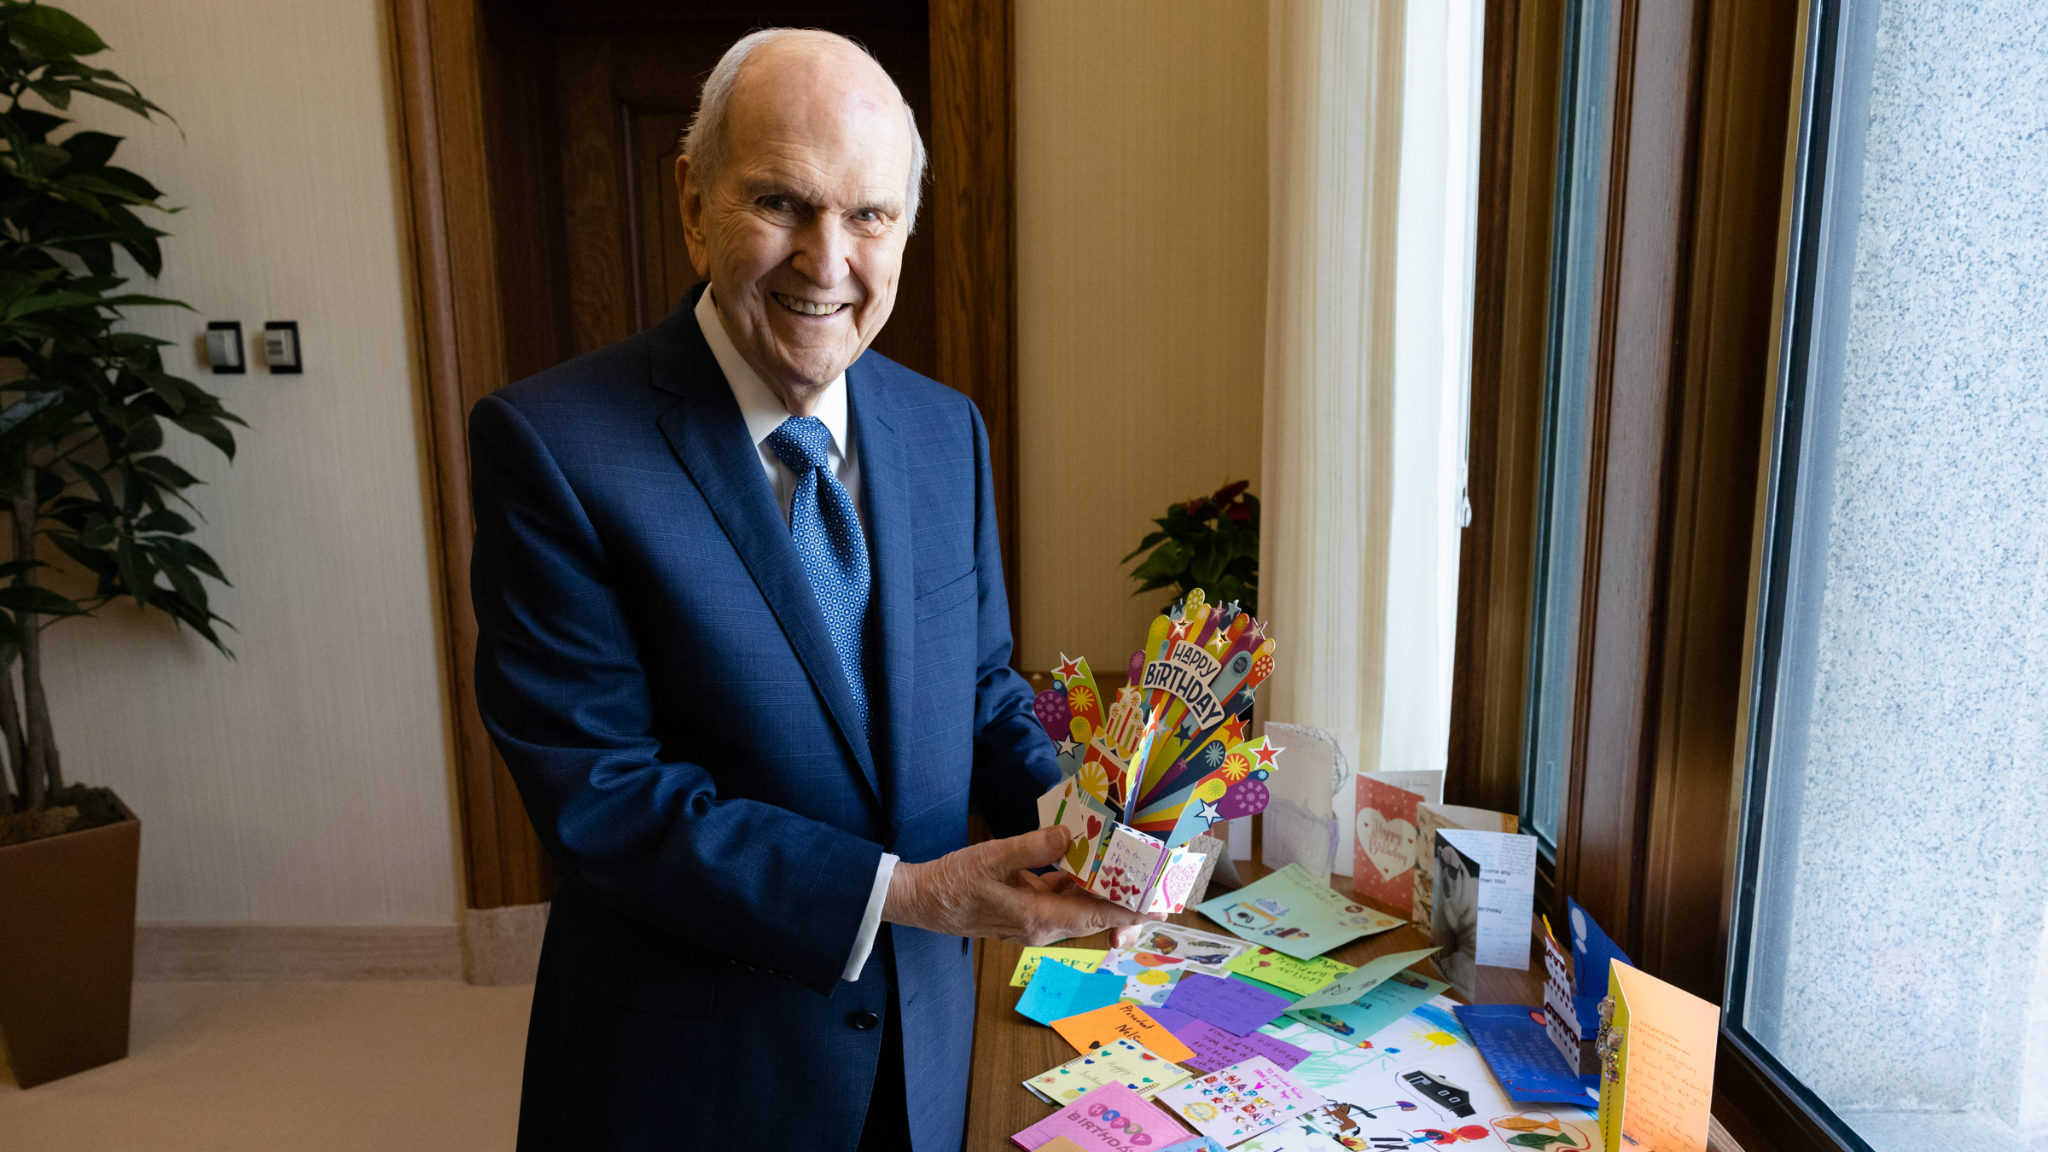 President Russell M. Nelson, of The Church of Jesus Christ of Latter-day Saints, celebrated his 98t...